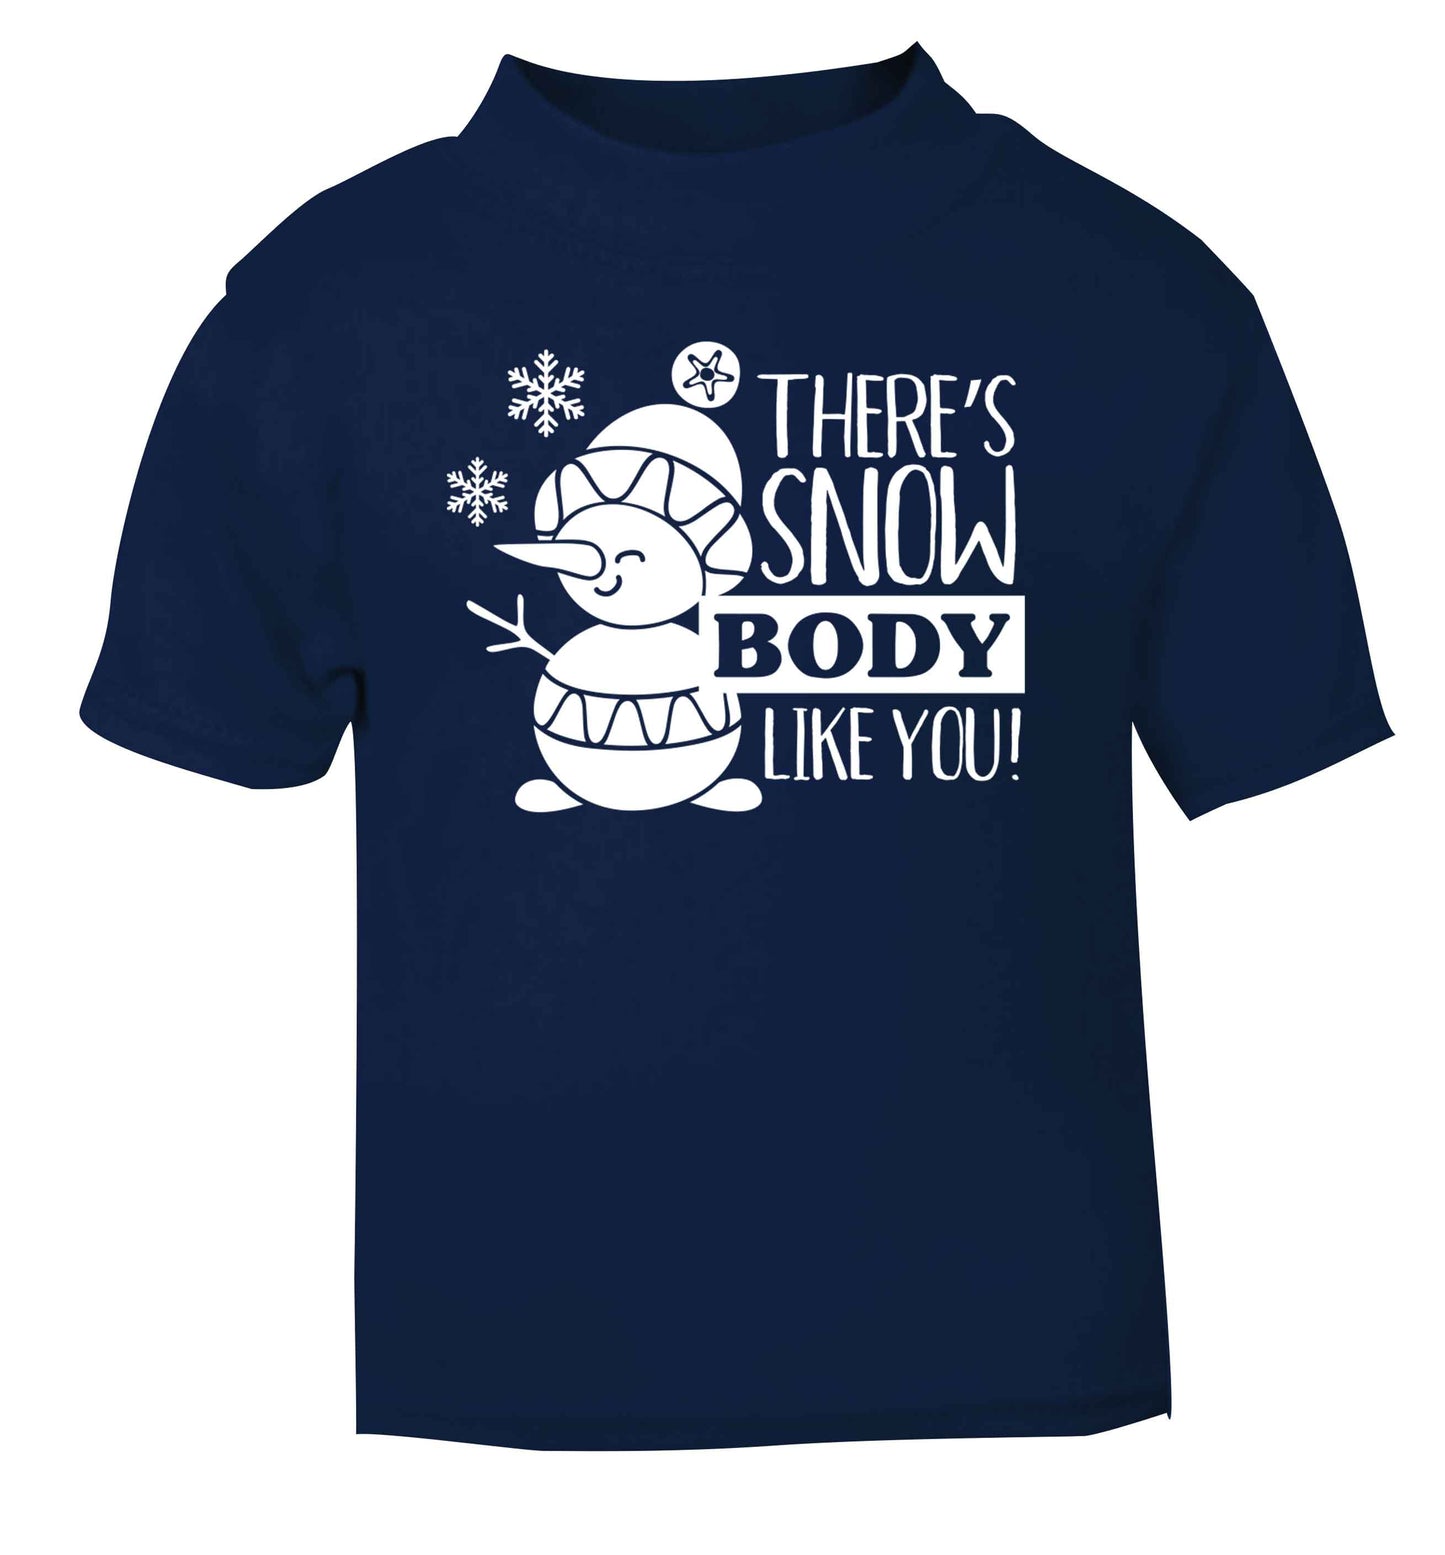 There's snow body like you navy baby toddler Tshirt 2 Years